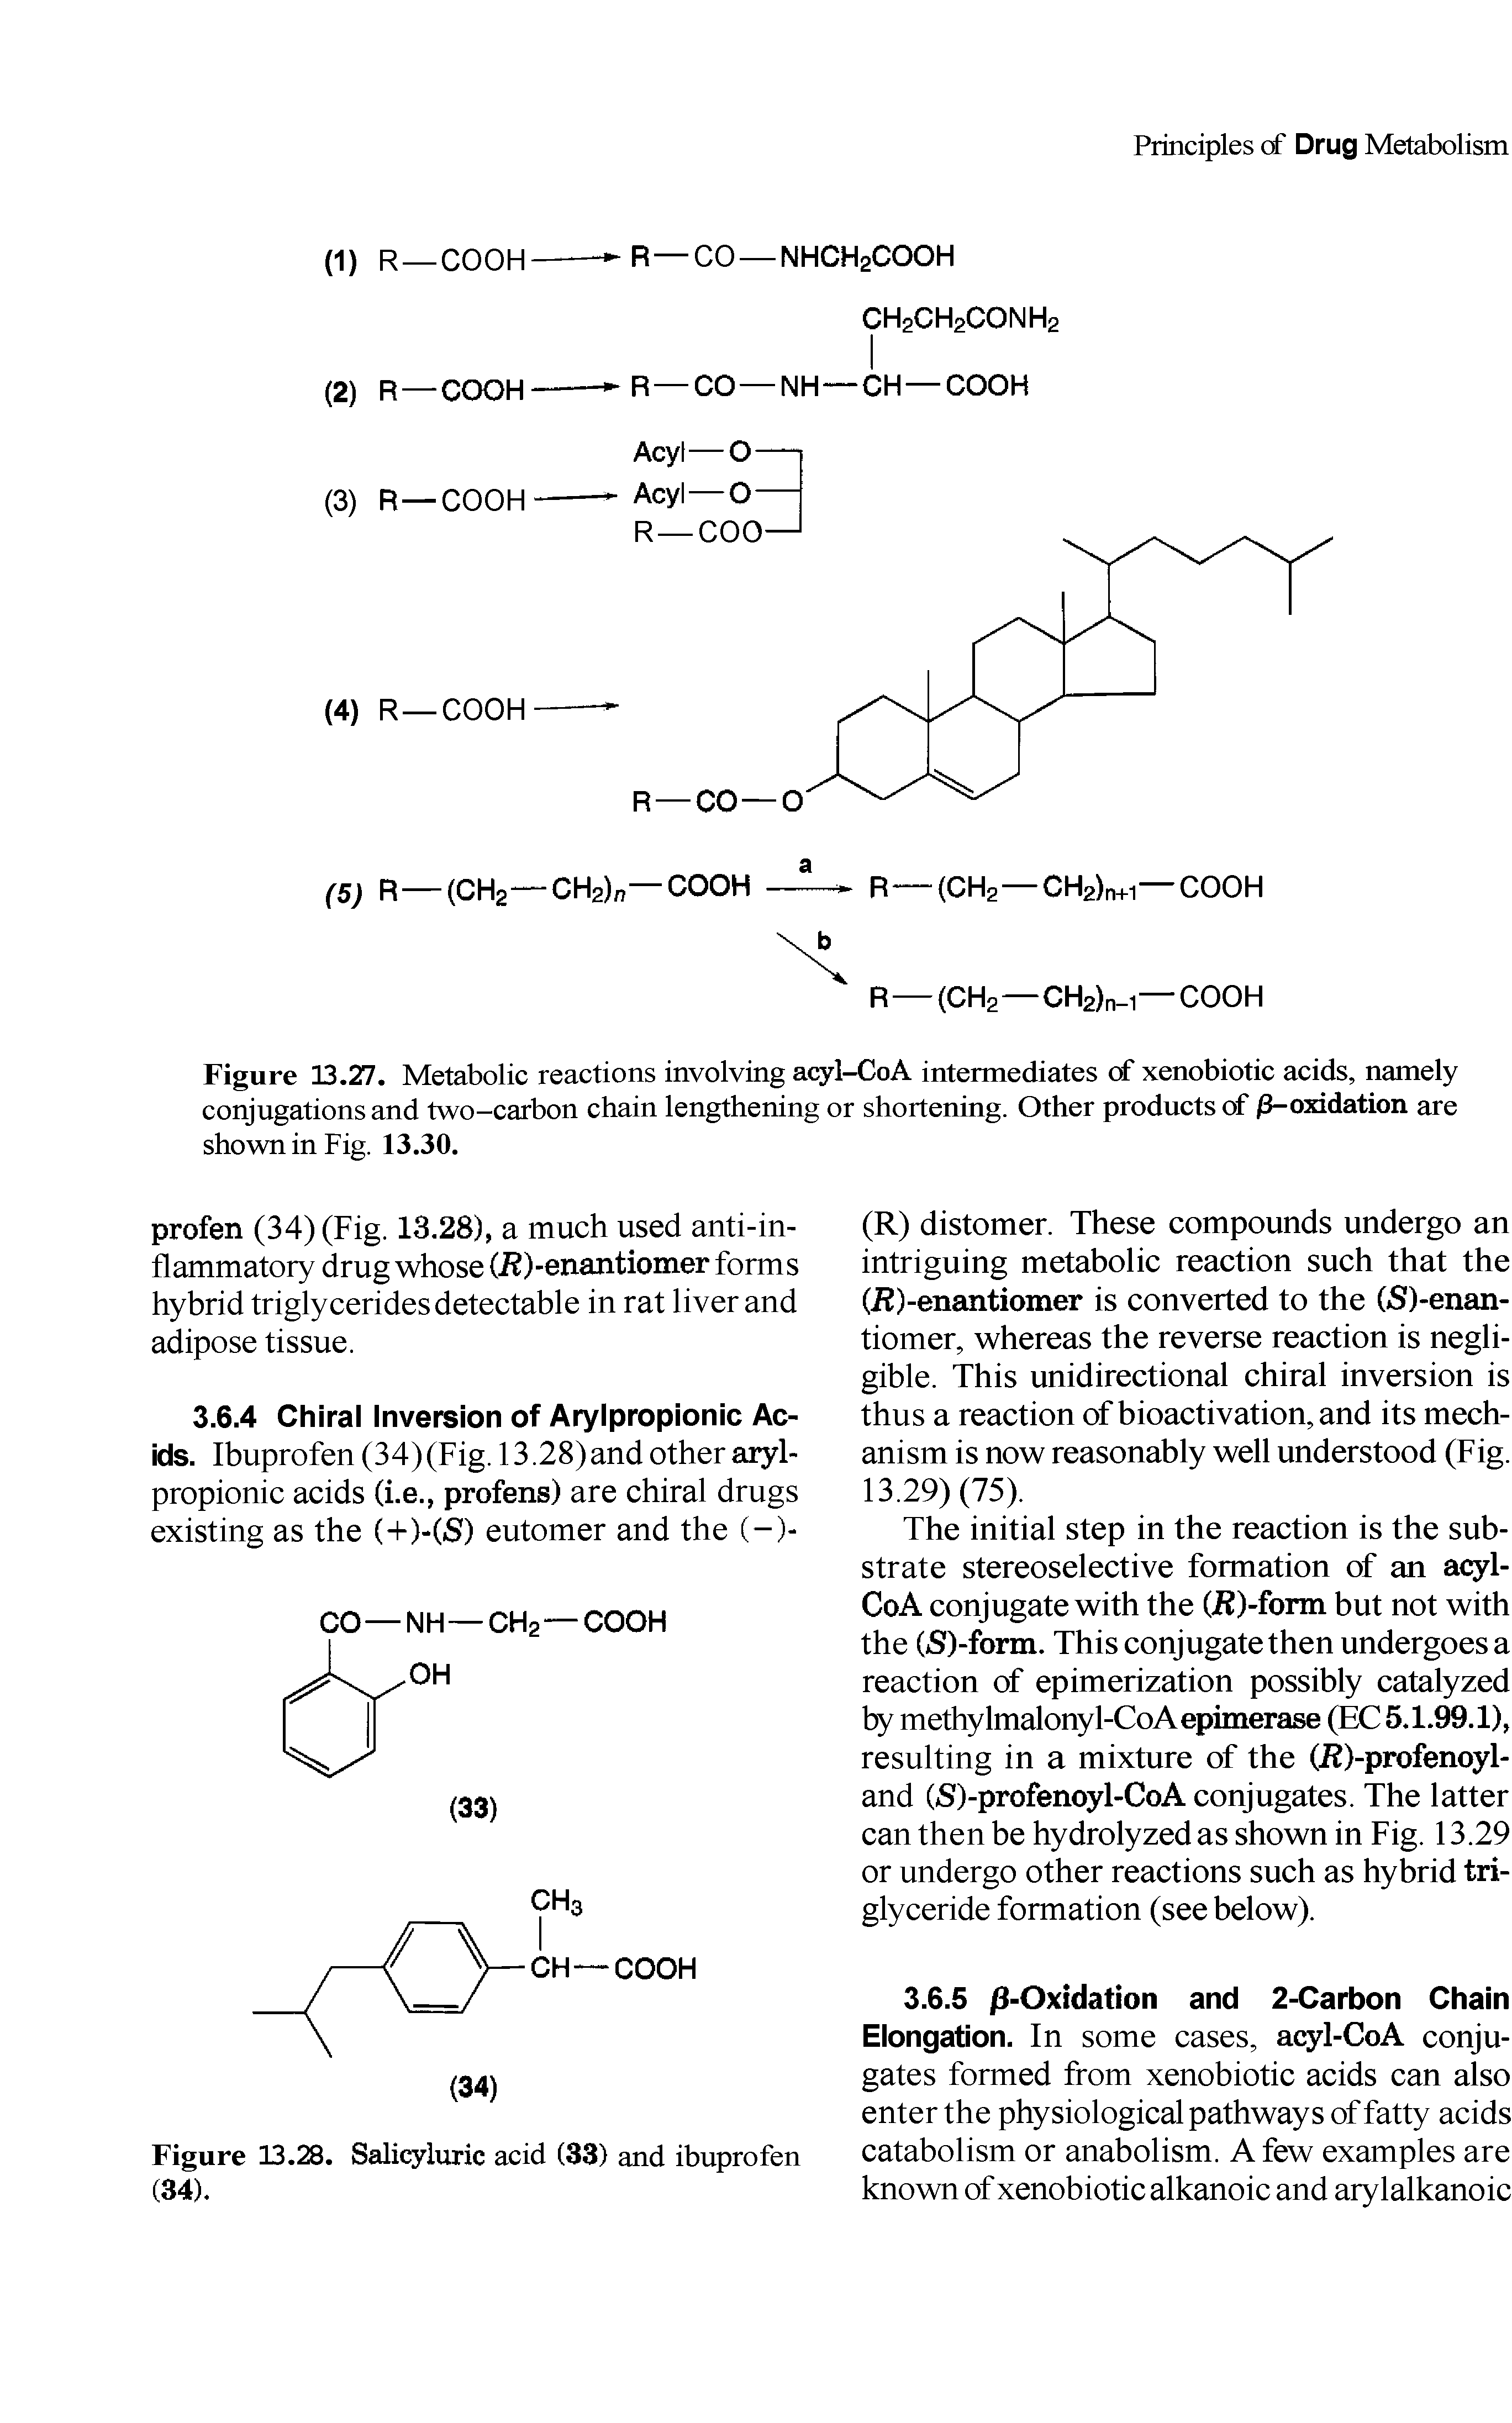 Figure 13.27. Metabolic reactions involving acyl-CoA intermediates of xenobiotic acids, namely conjugations and two-carbon chain lengthening or shortening. Other products of /3-oxidation are shown in Fig. 13.30.